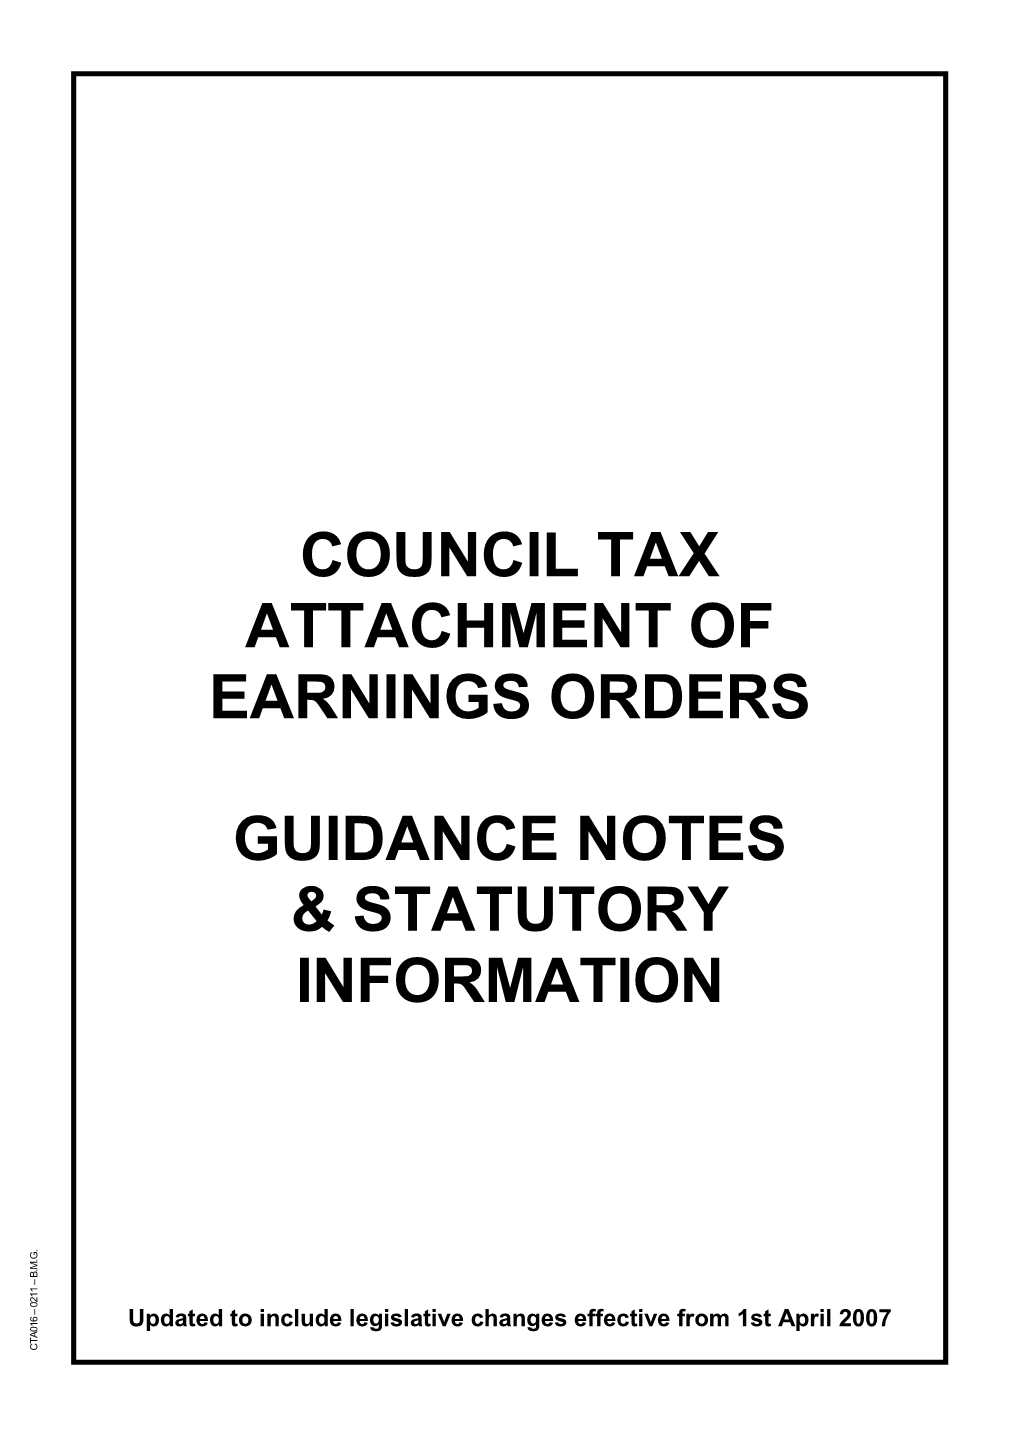 Council Tax Attachment of Earnings Orders Guidance Notes & Statutory